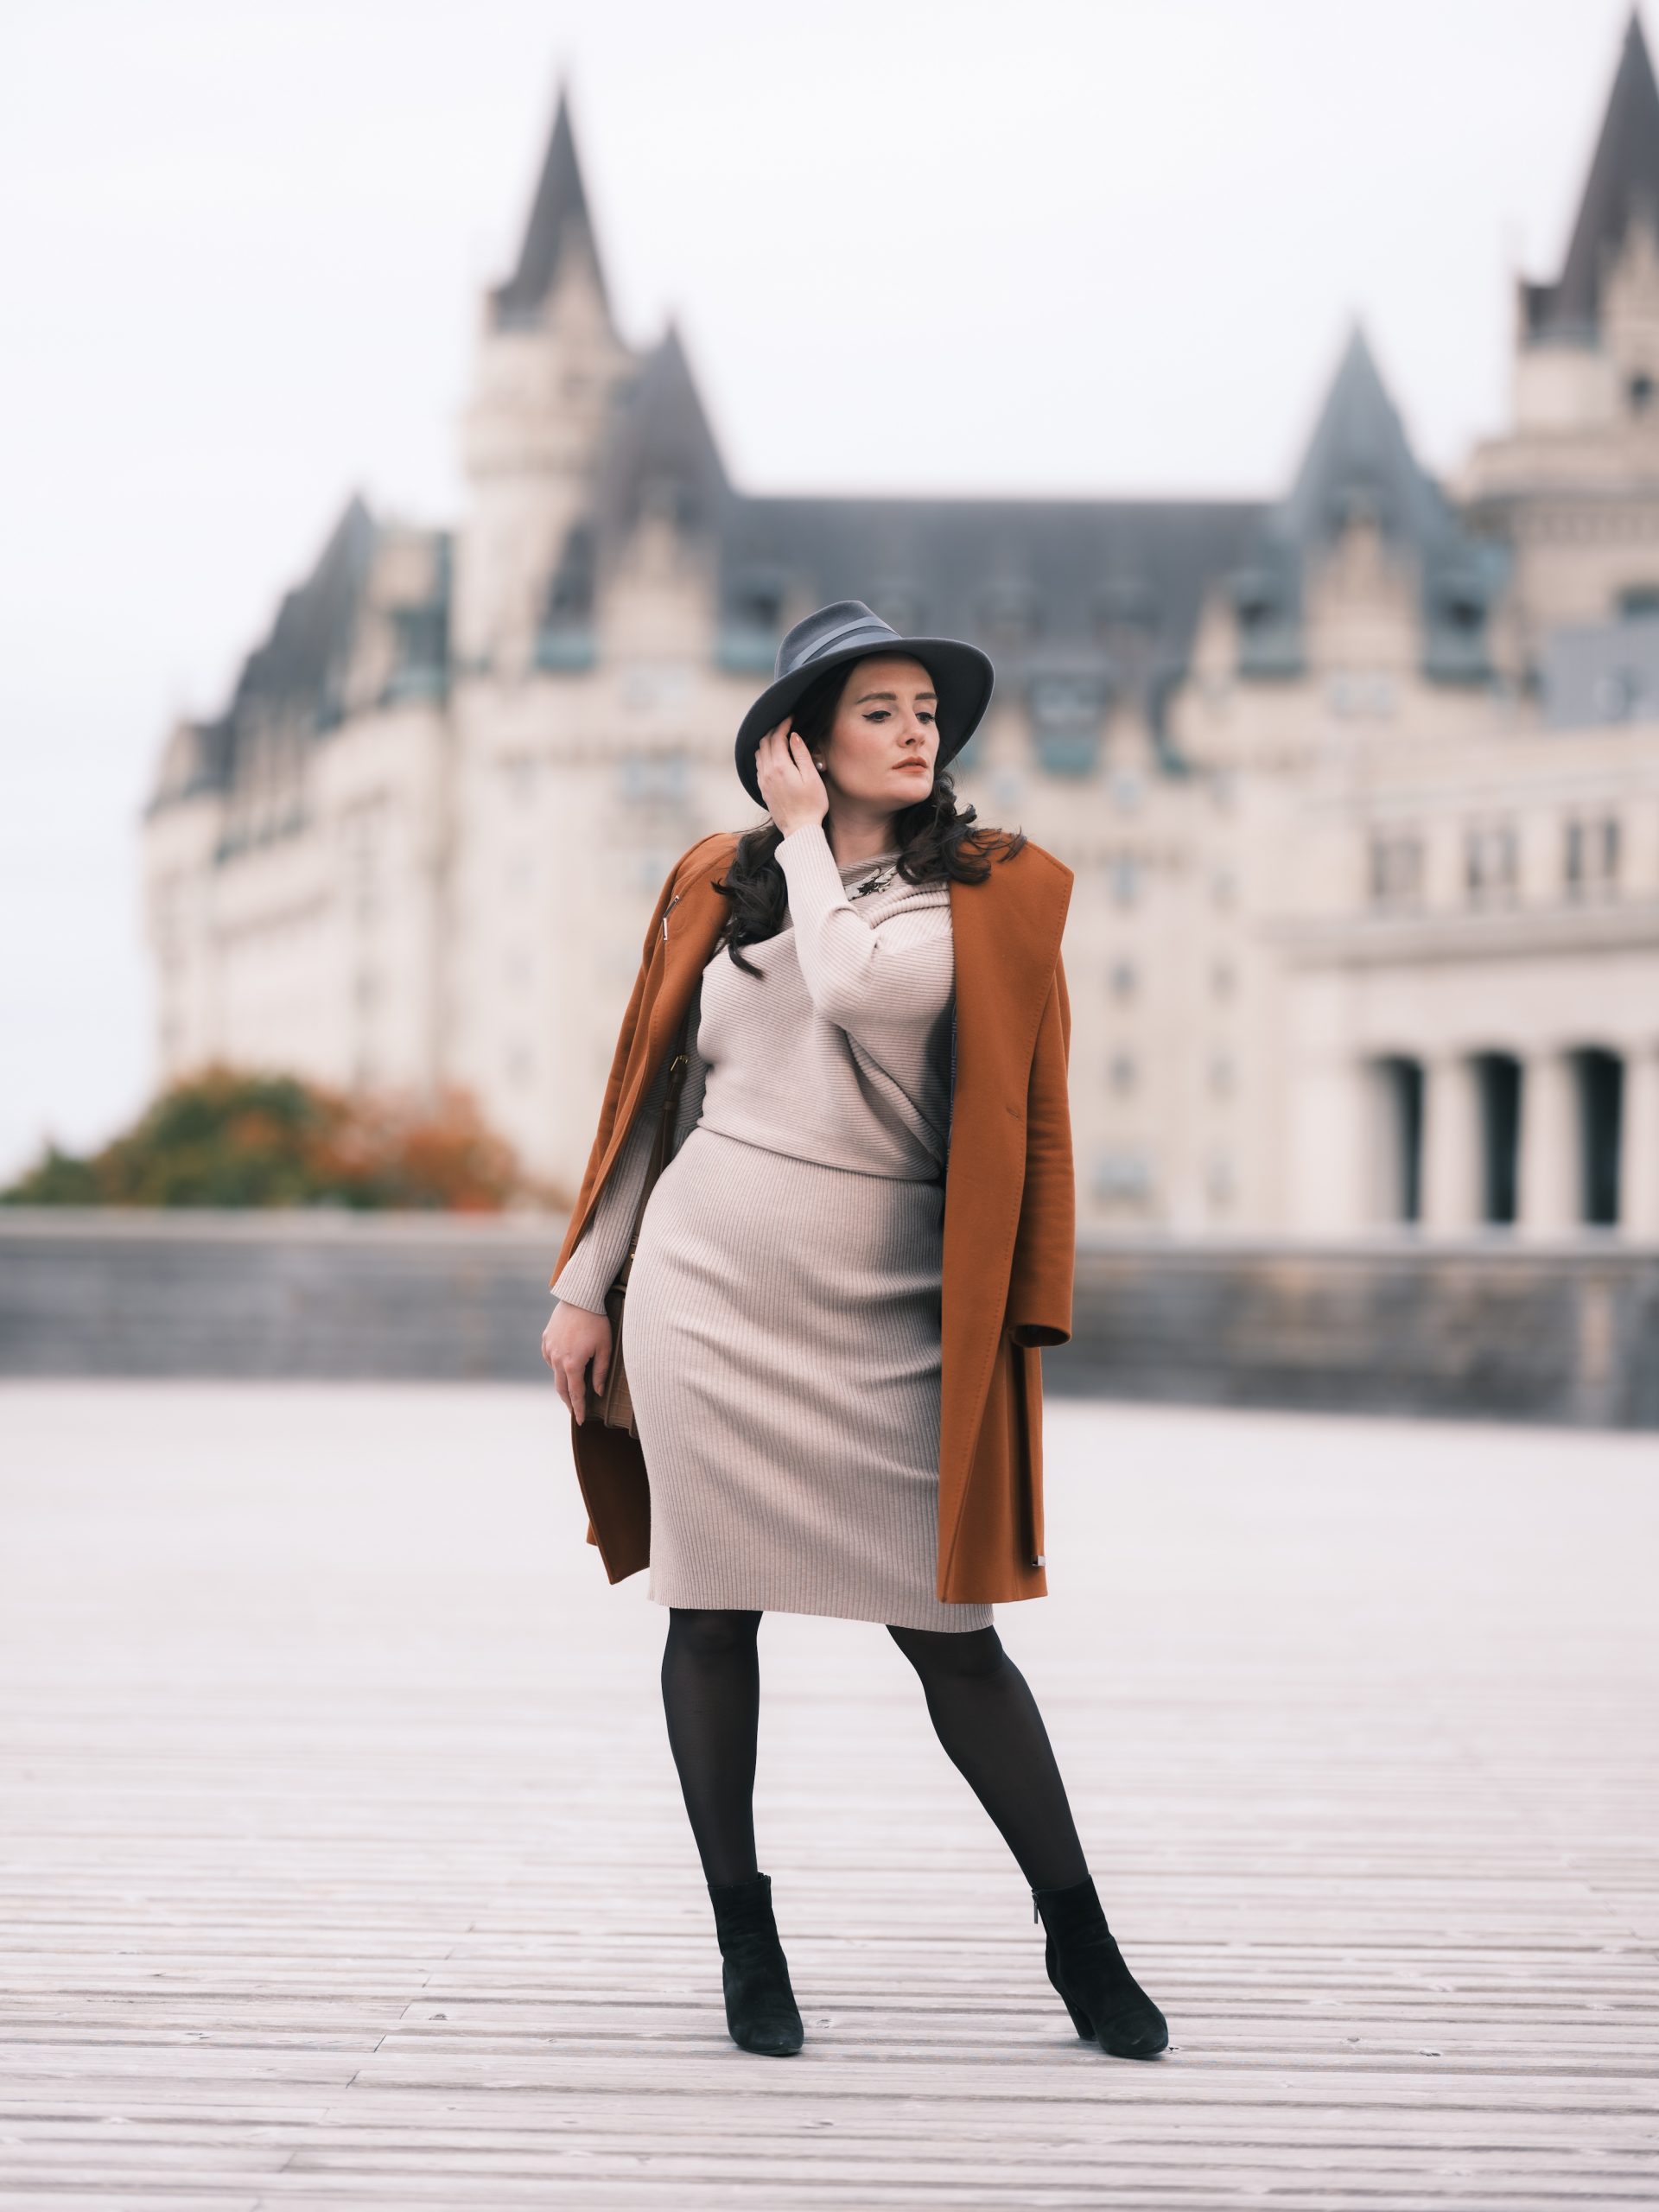 Fall Fashion: Sweater (Dress) Weather | Taste and Tipple